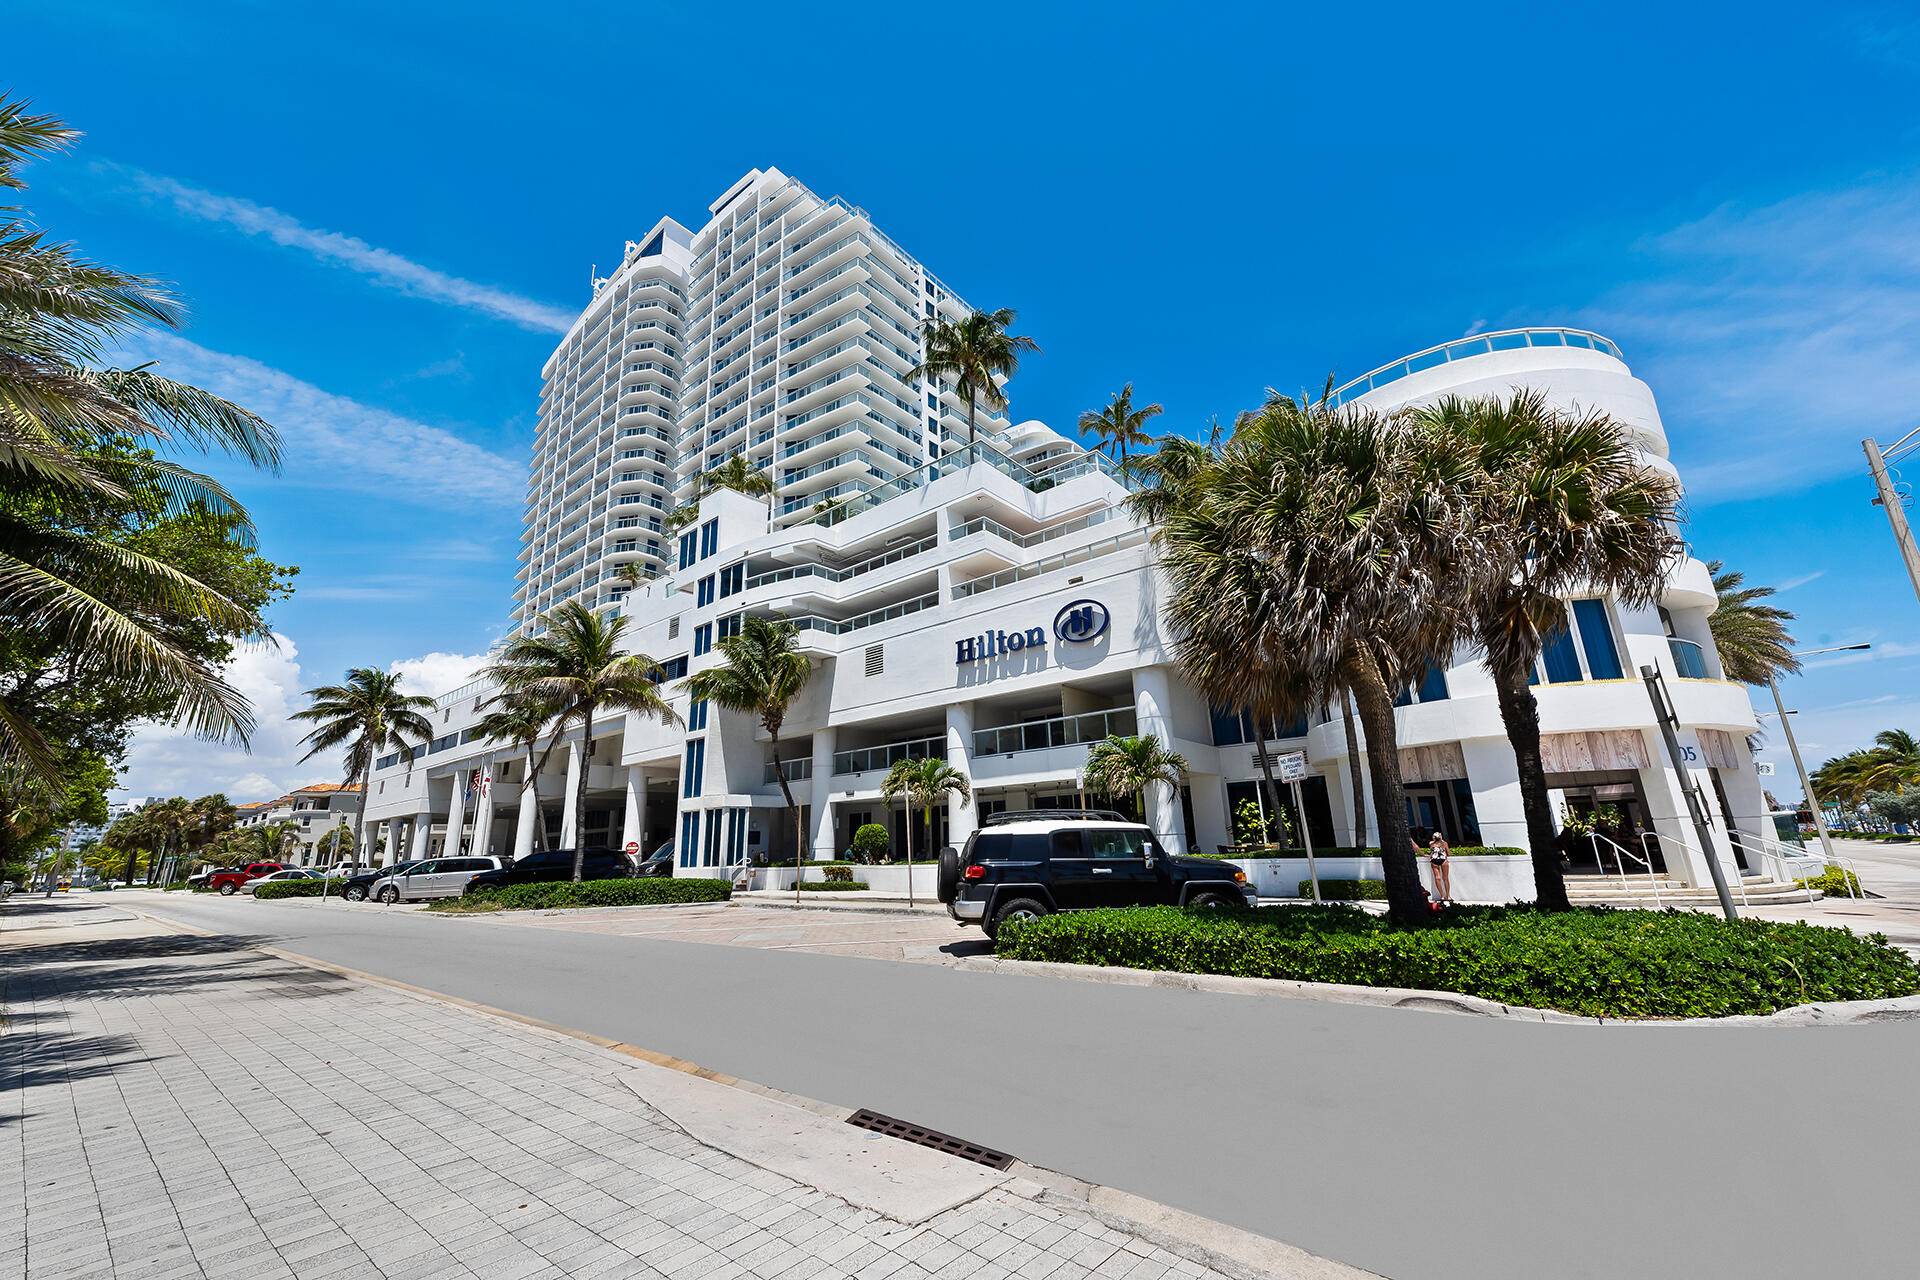 PERFECT location to enjoy everything Fort Lauderdale has to offer, just steps from the beach, restaurants and other entertainment !